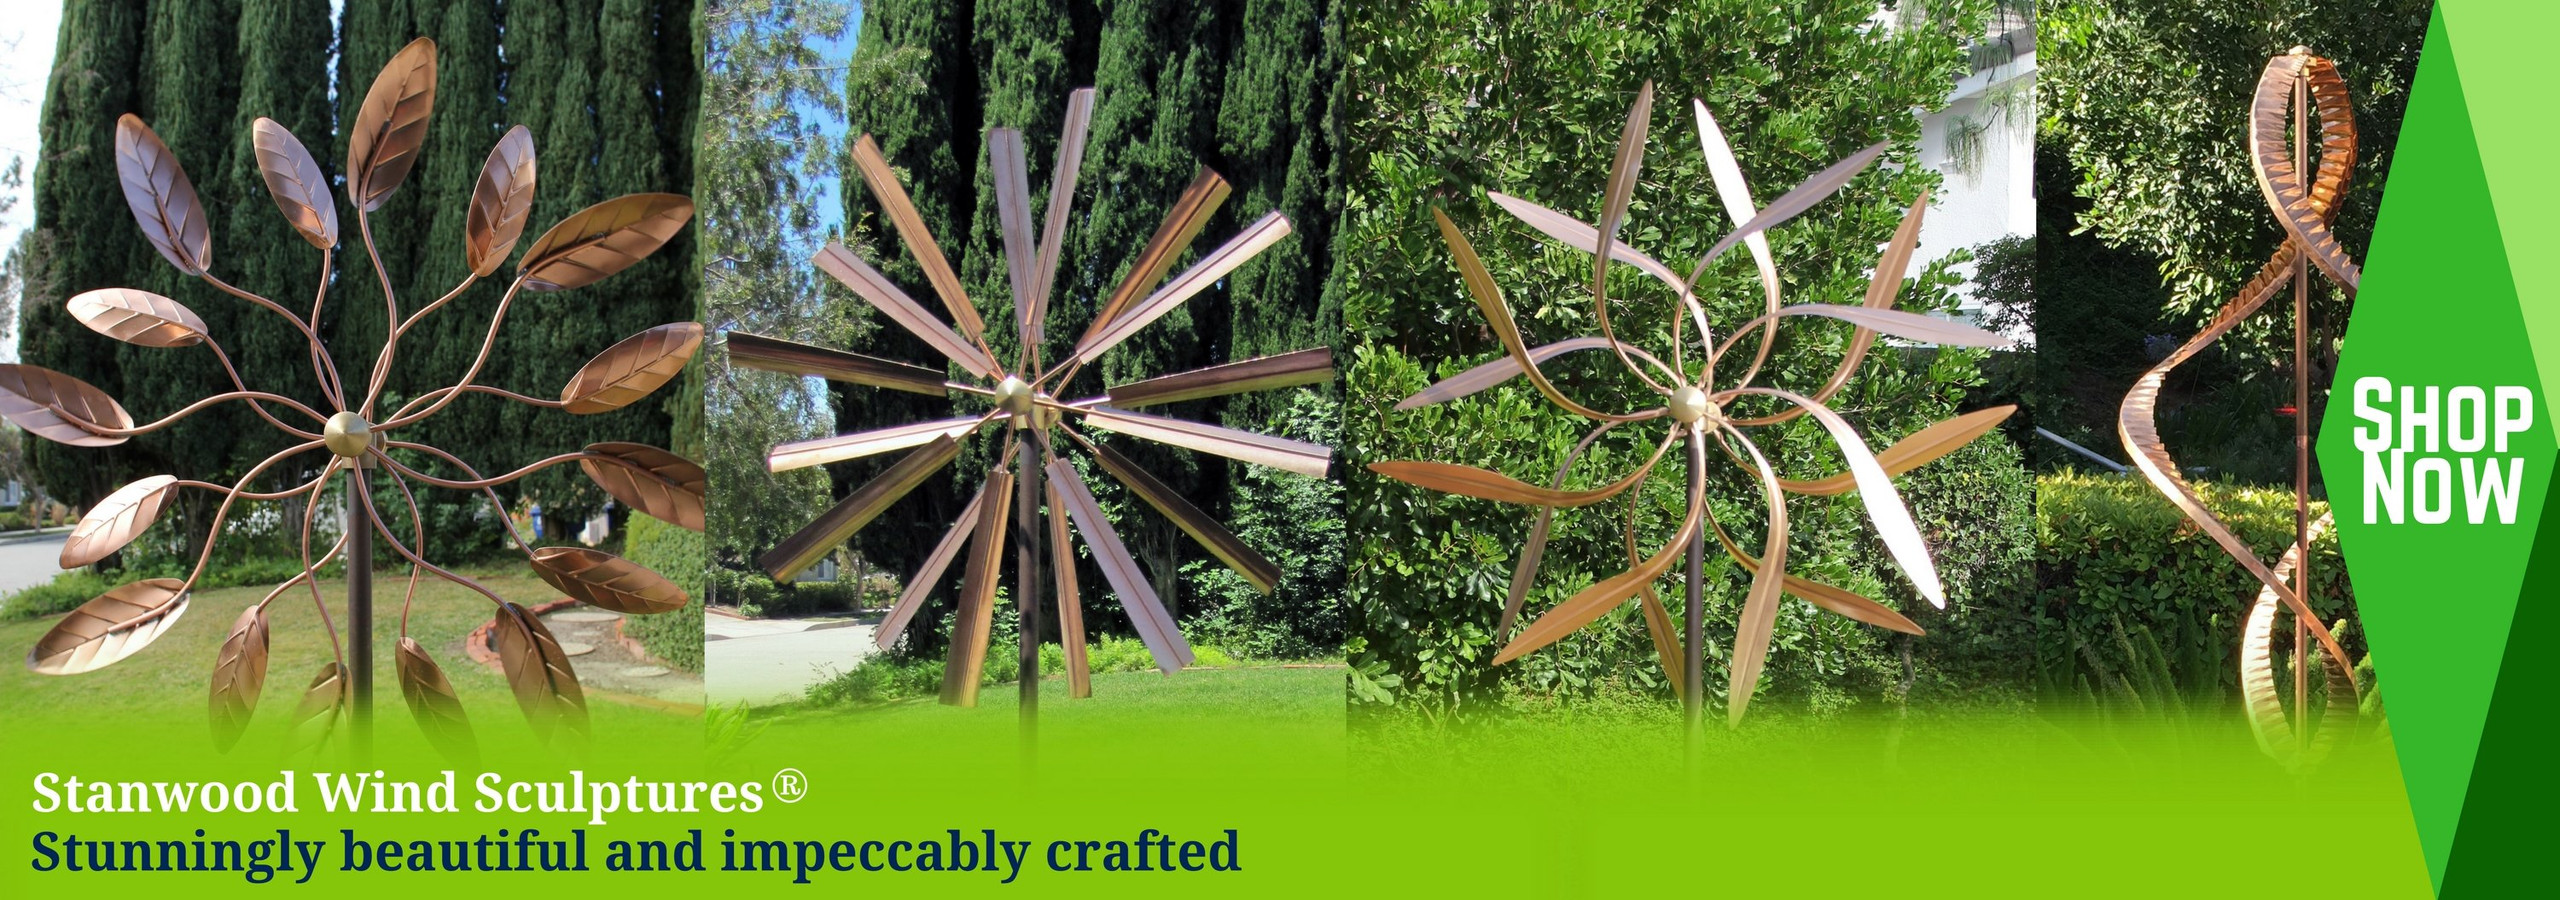 Kinetic Wind Sculptures | Copper Rain Chains | Yarn Winder and Swift